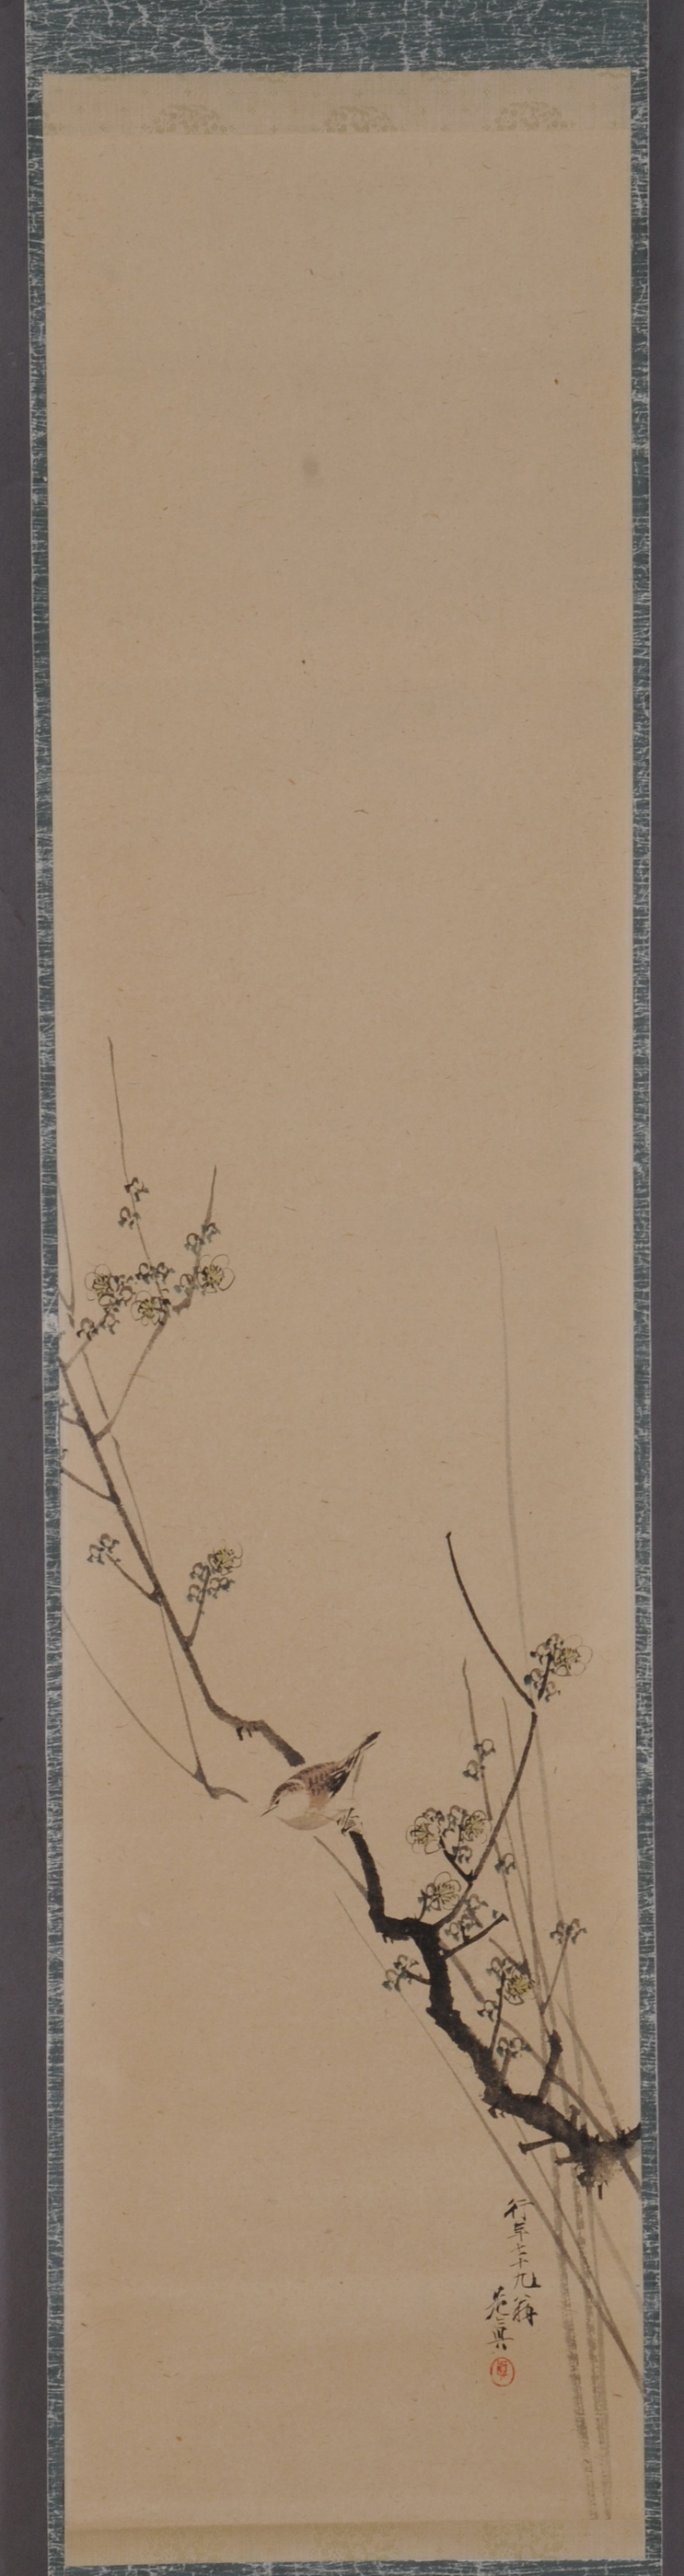 JAPANESE SCROLL PAINTING OF A SONG 13dc0f